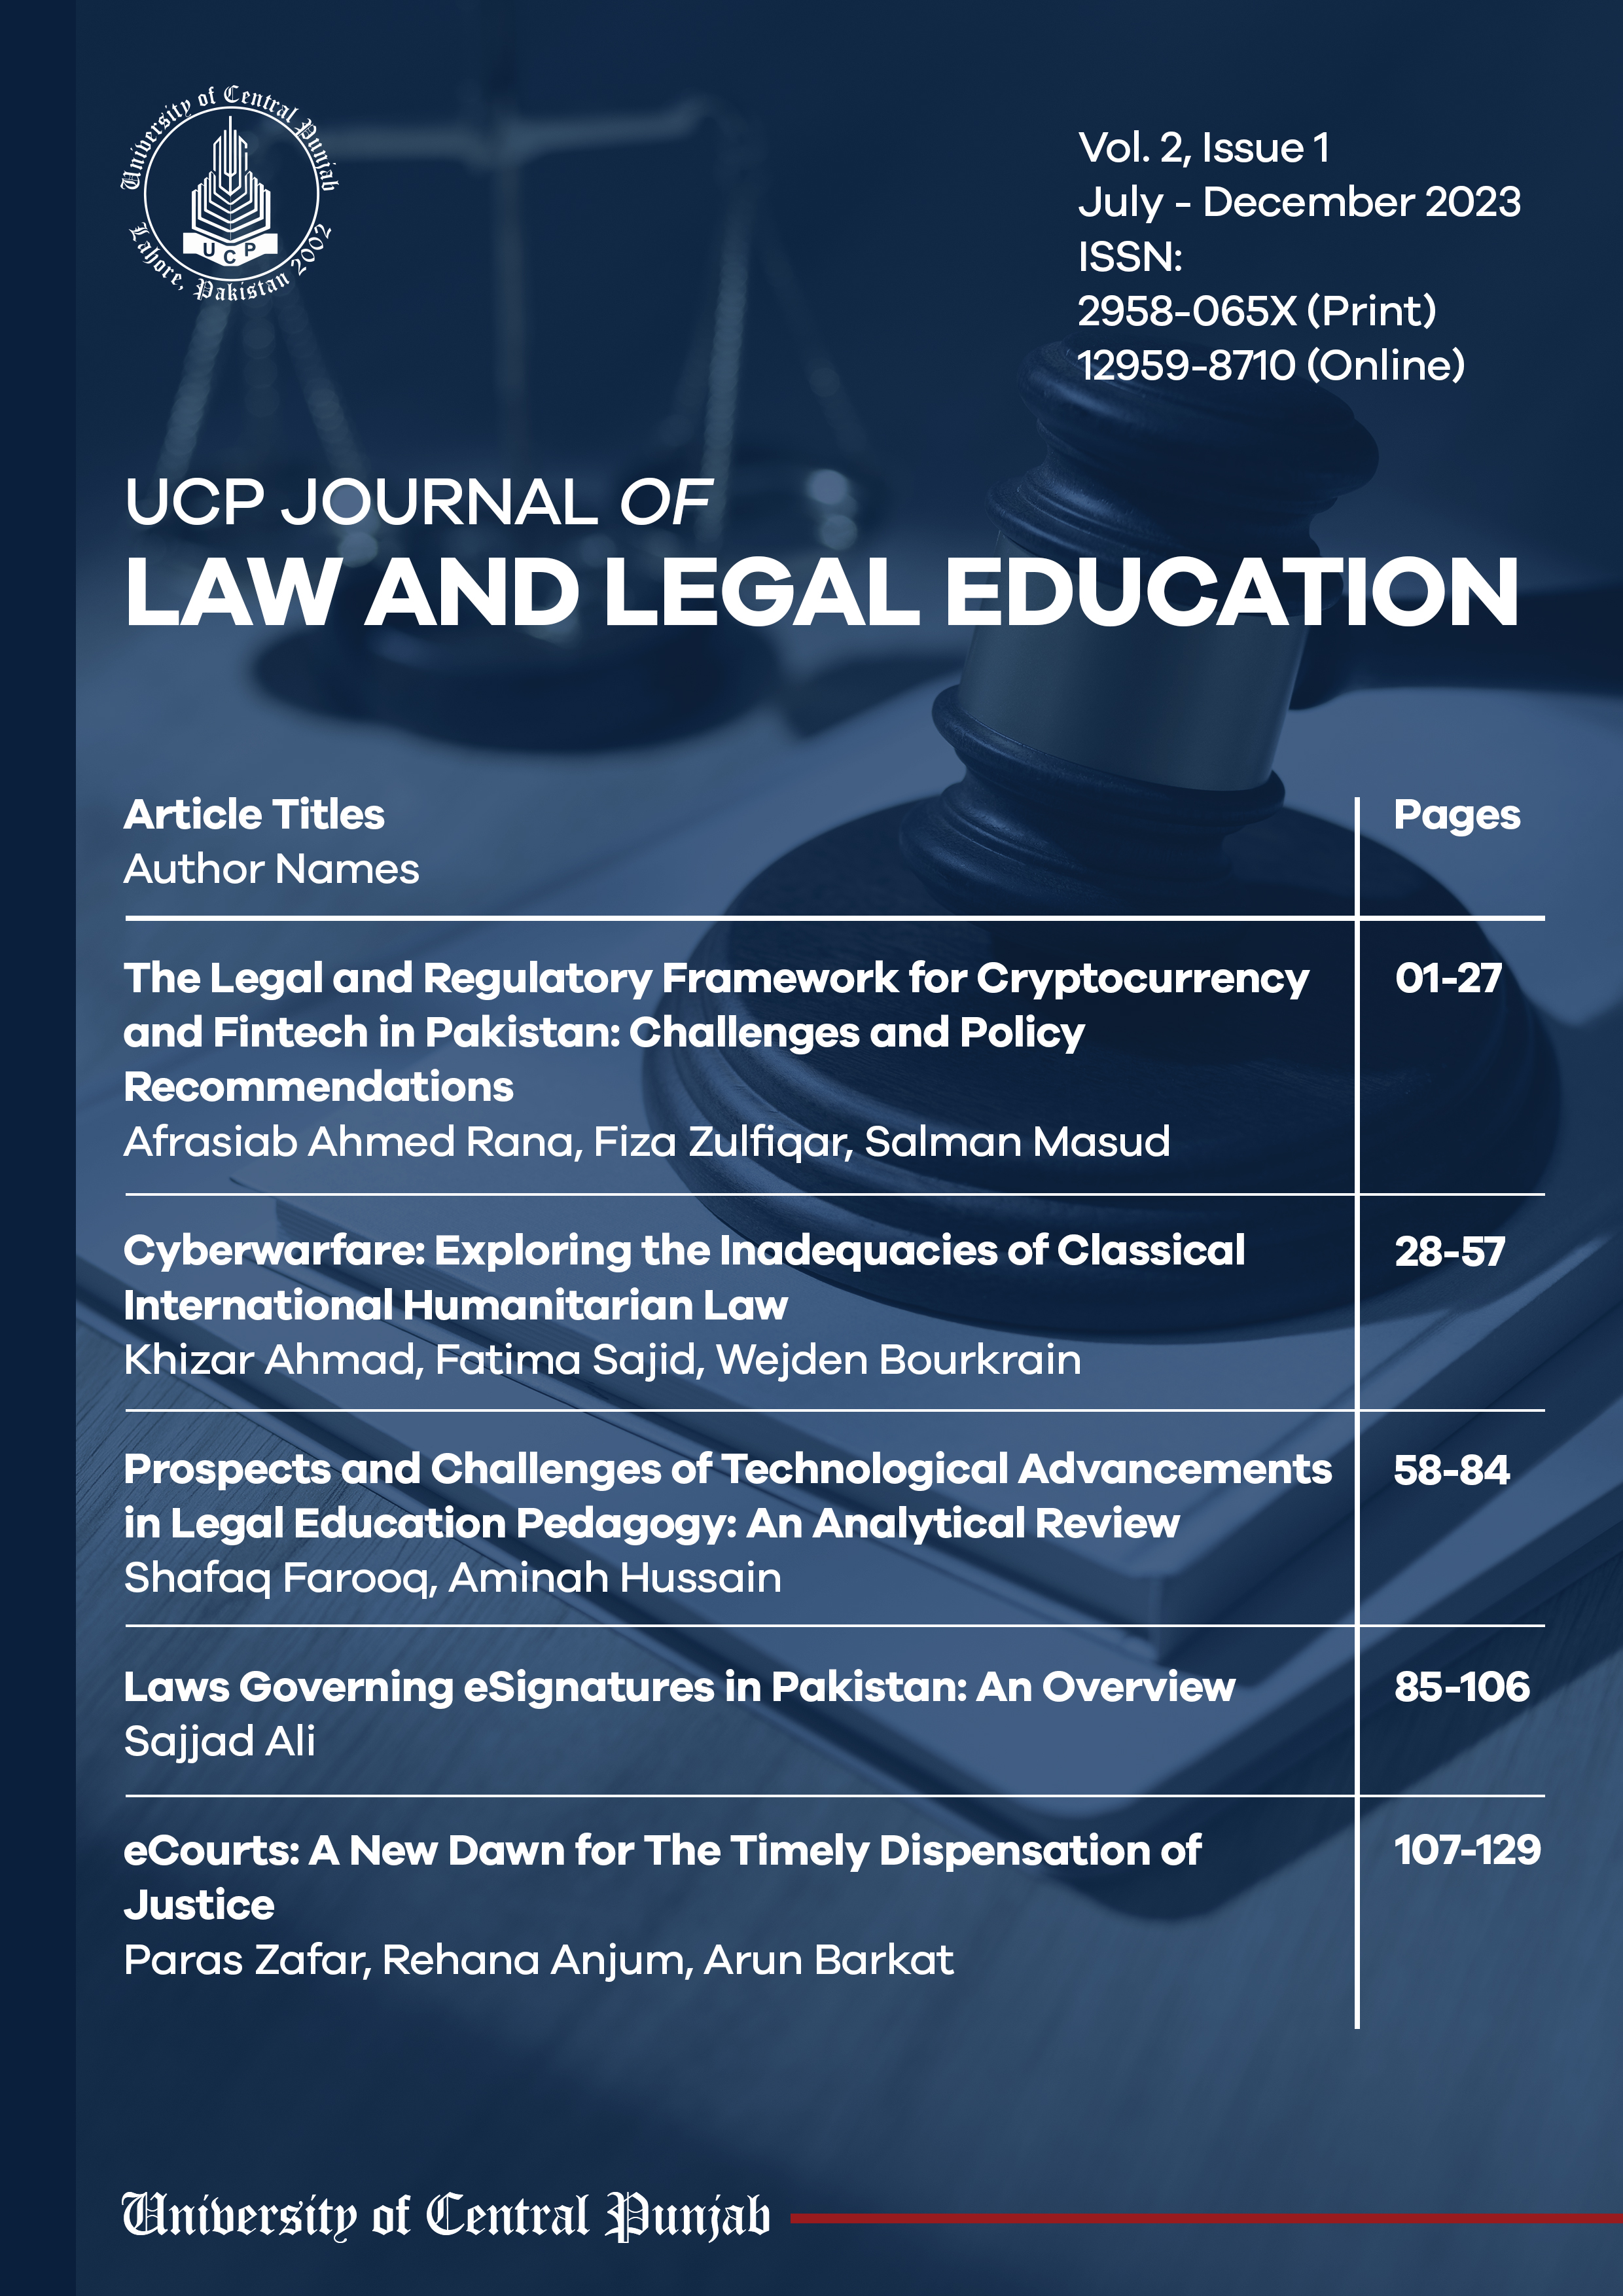 					View Vol. 2 No. 1 (2023): UCP Journal of Law and Legal Education
				